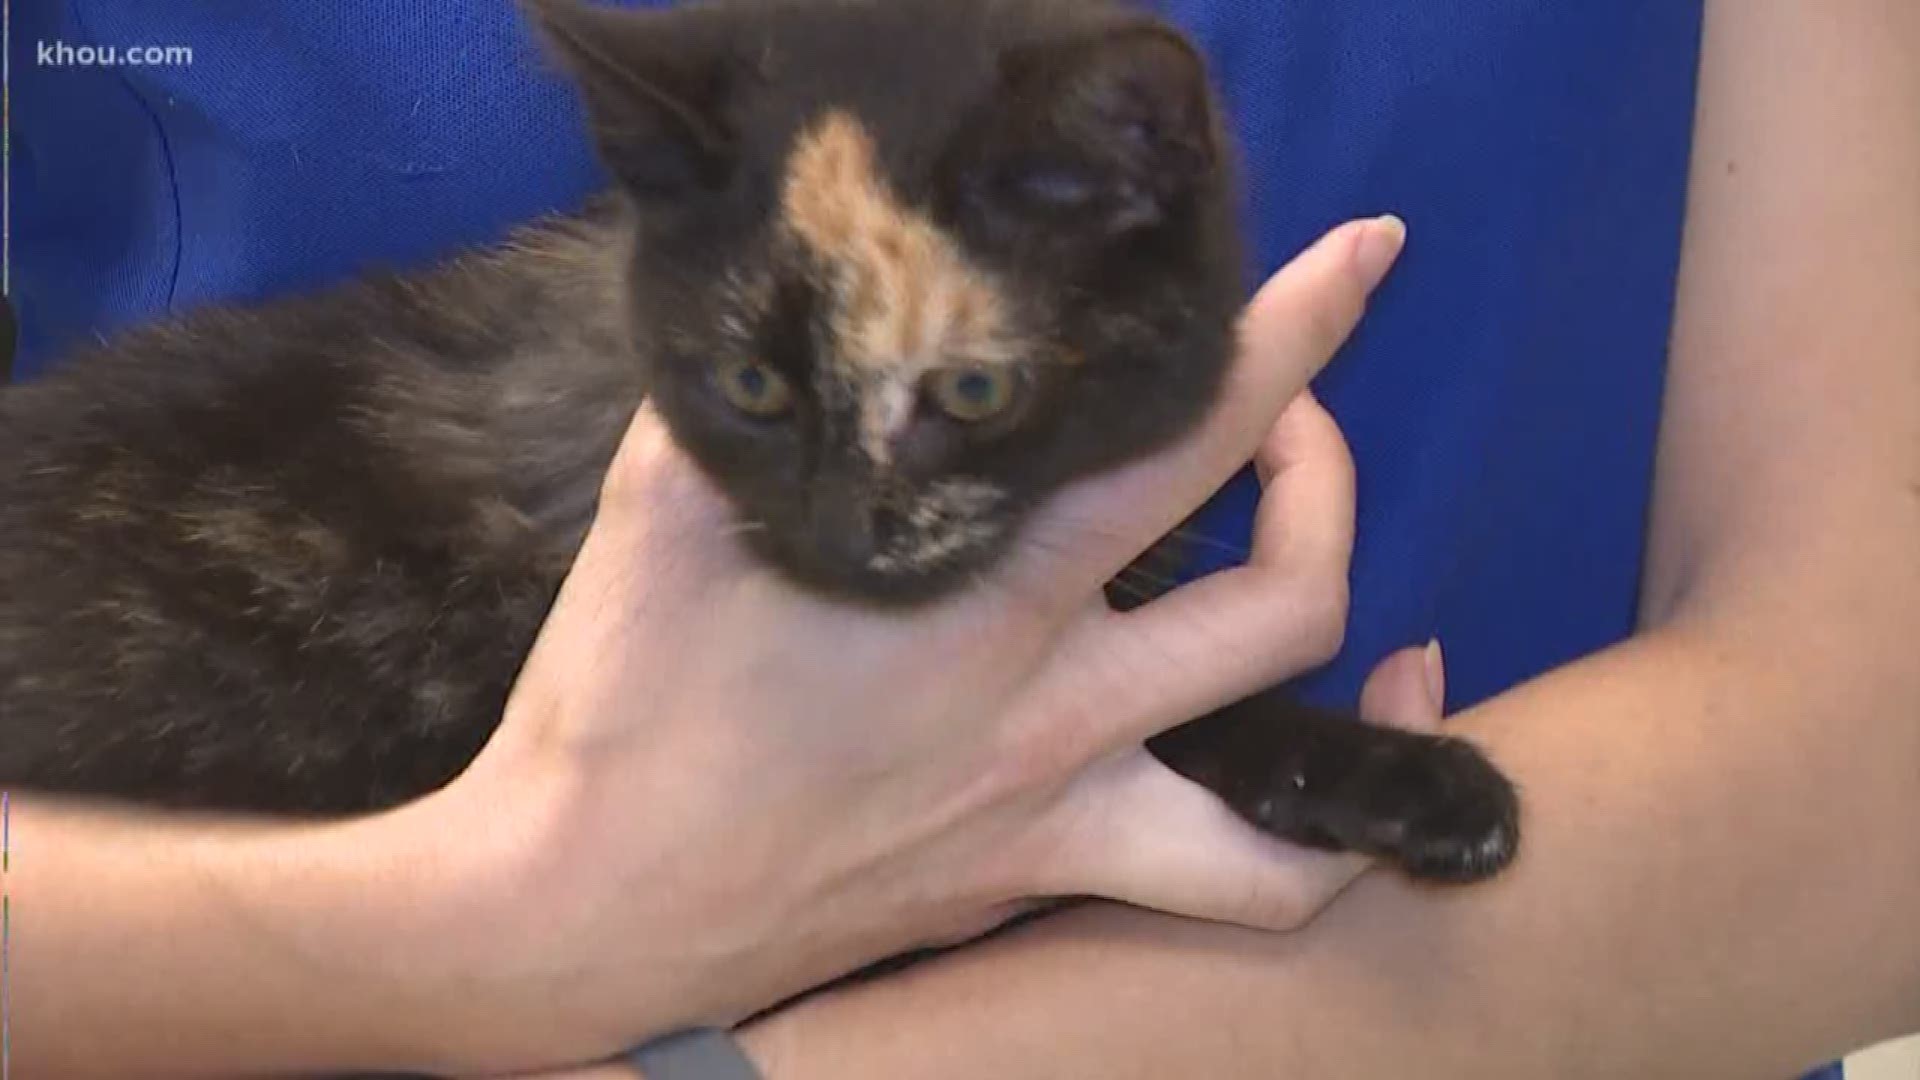 The KHOU Pet Of The Week is 3-month-old Firefly who was found abandoned at a gas station with a broken leg.